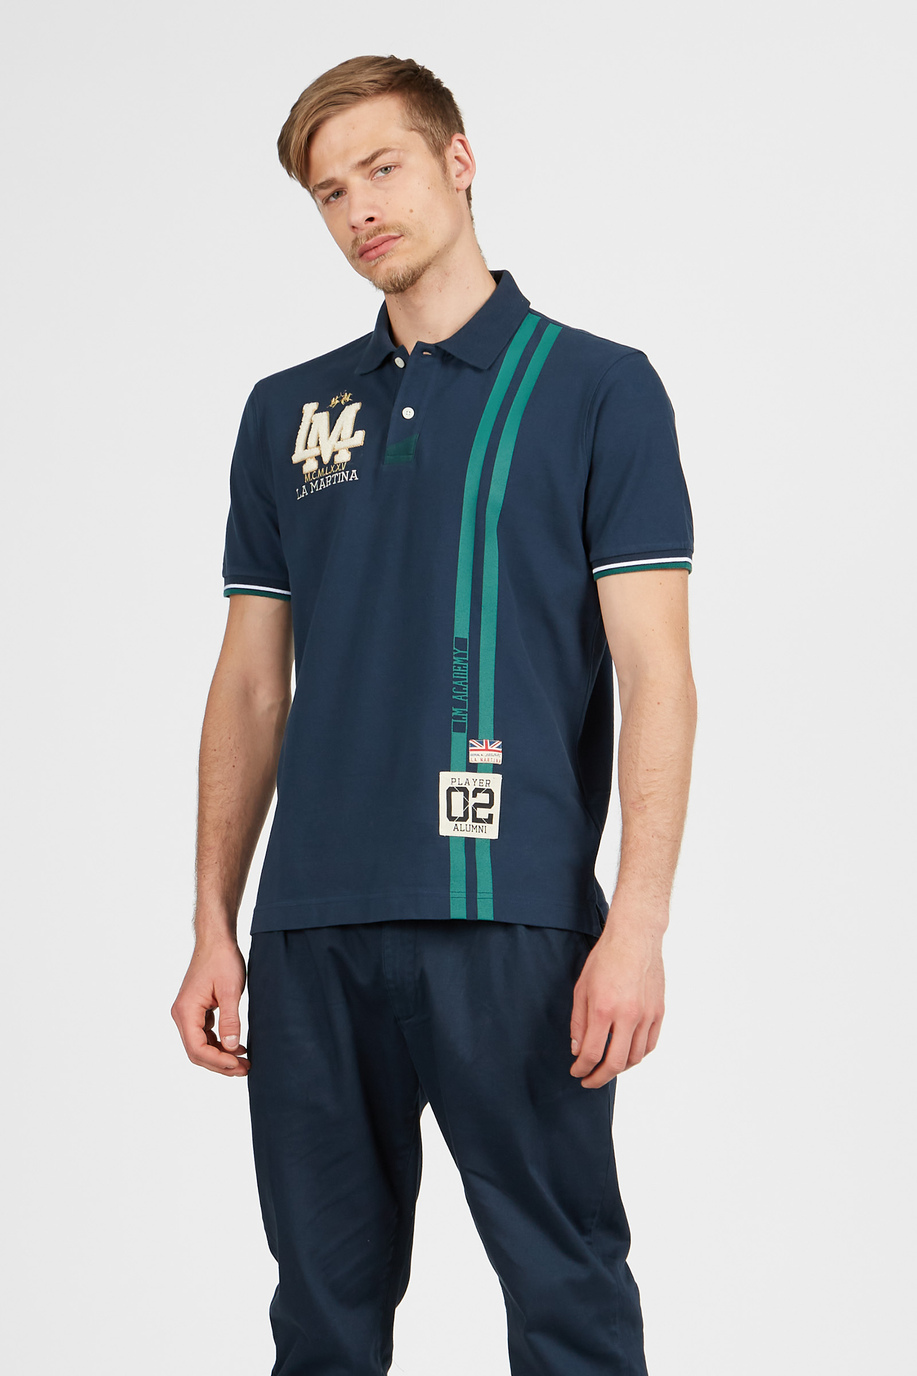 Men's long-sleeved polo shirt in 100% cotton - Preview  | La Martina - Official Online Shop